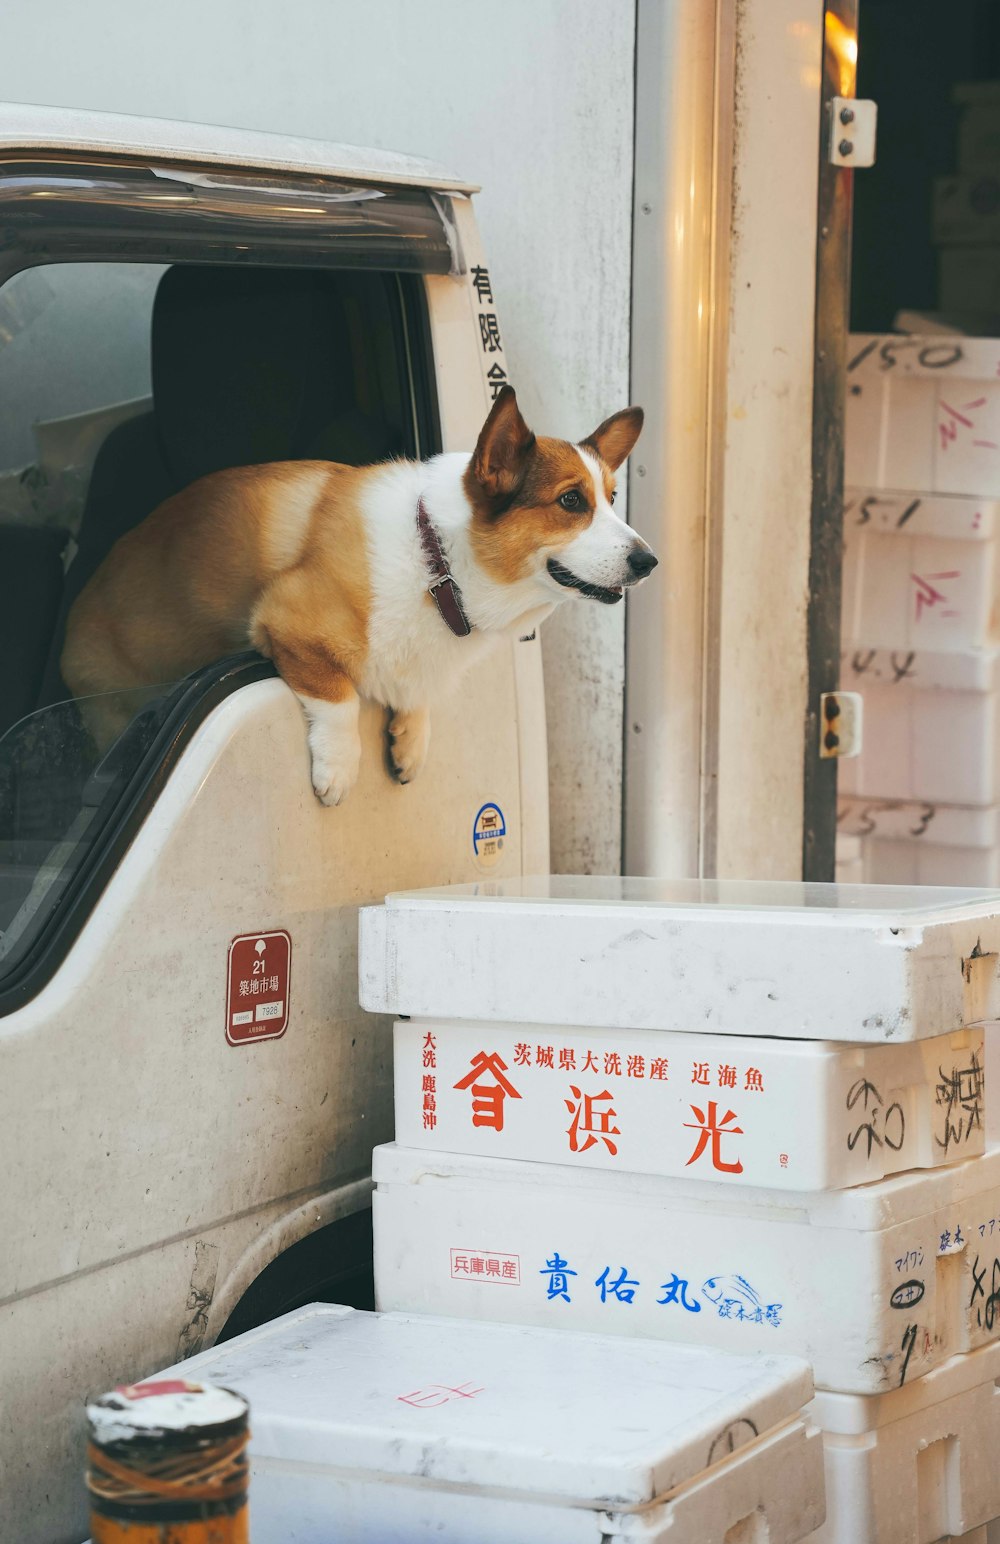 a dog standing on the back of a truck